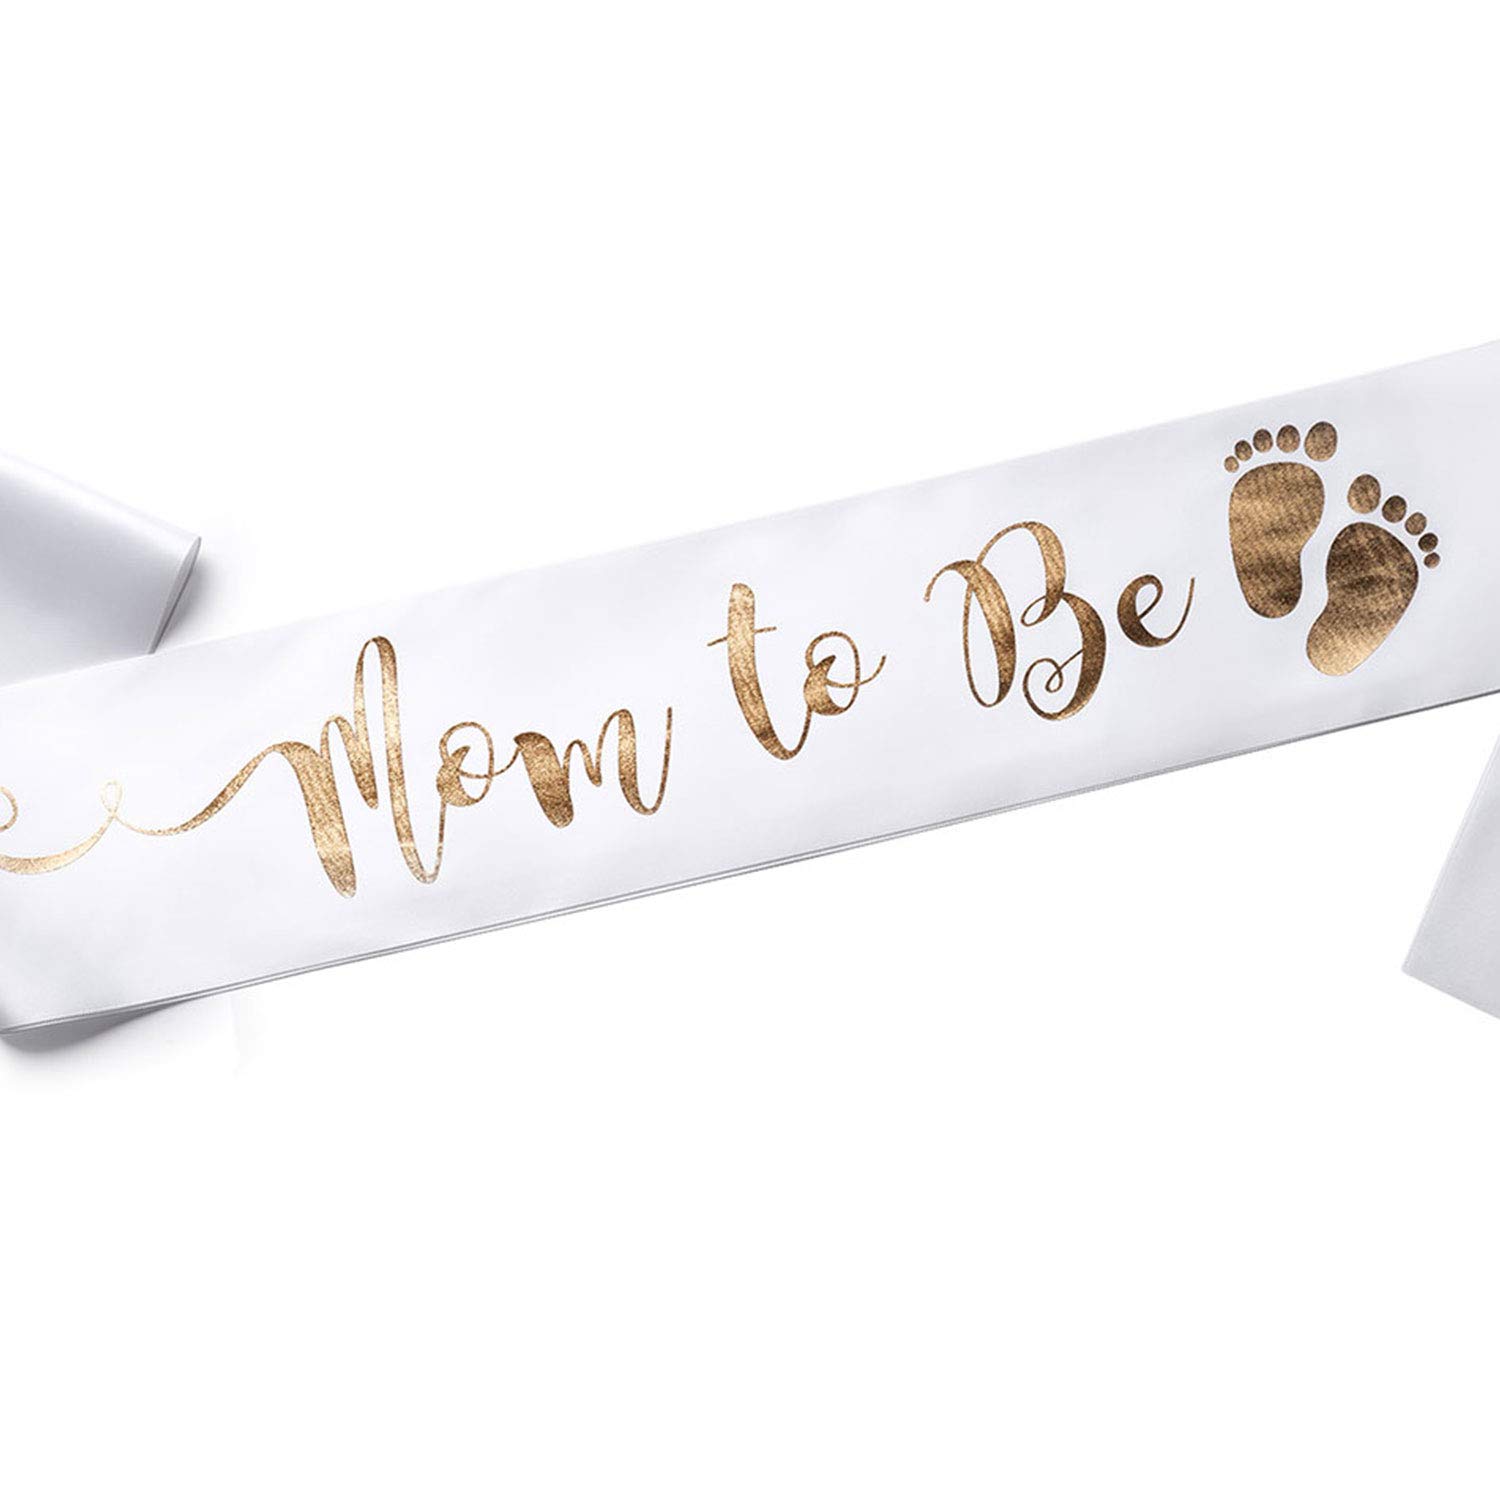 OLILLY Perfect White and Gold Mom to Be Sash - Enjoy Your Baby Shower (White and Gold)